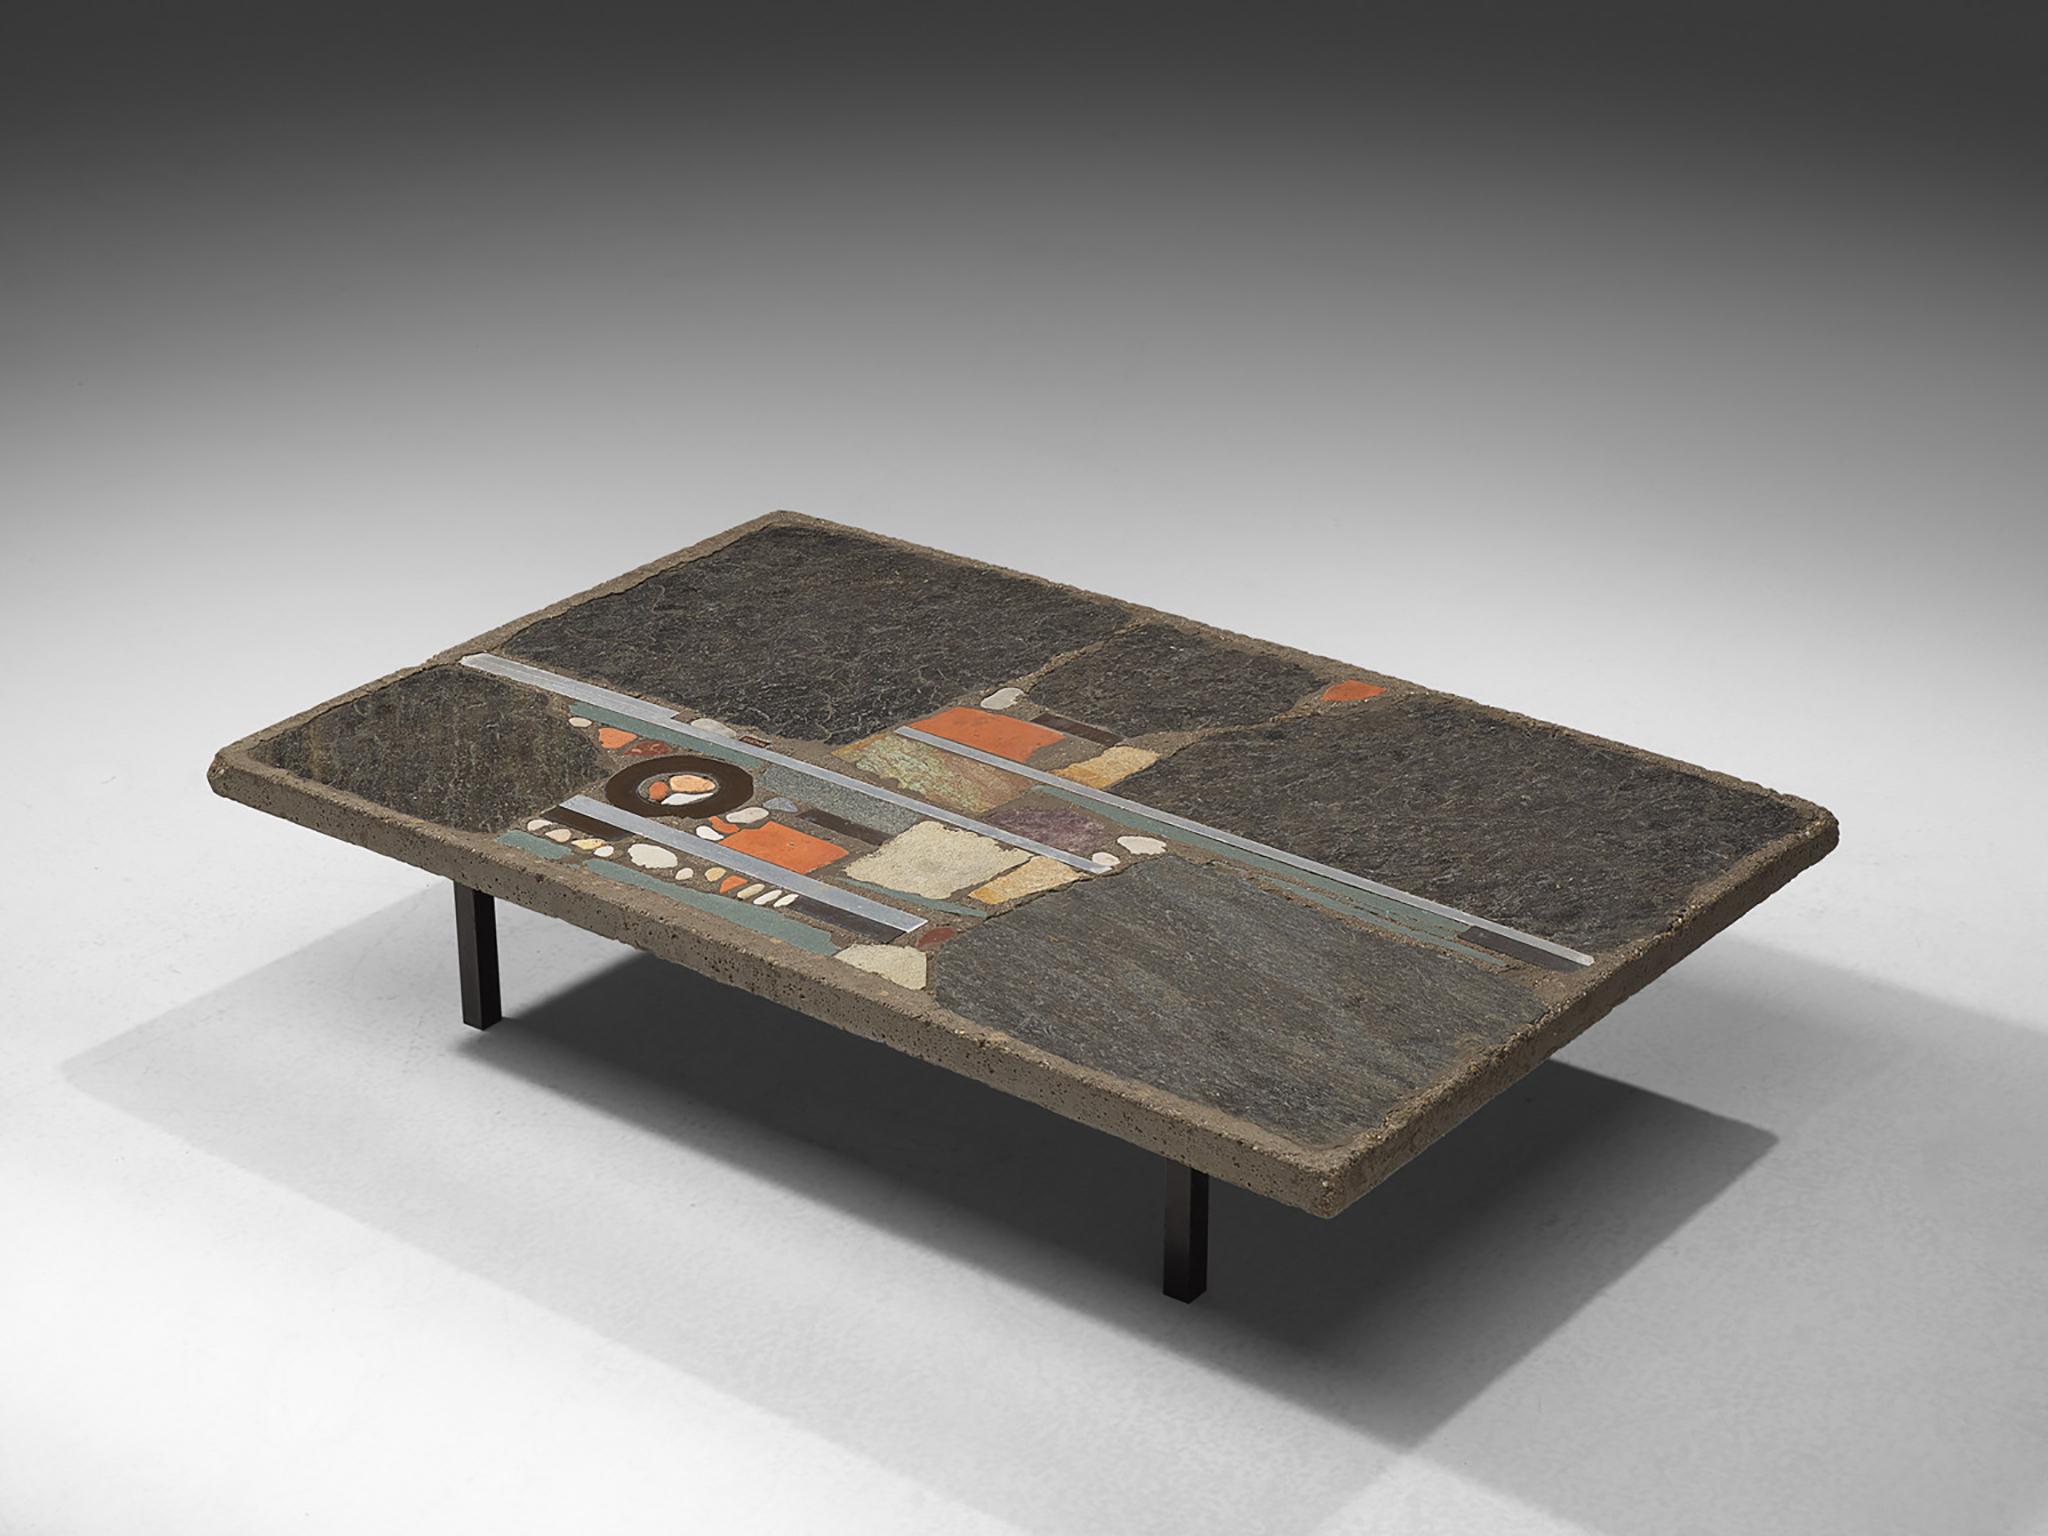 Paul Kingma, slate and ceramic tile coffee table, the Netherlands, 1980s. 

Abstract design of metals, slate and other stones, set into concrete panel. The different materials create a beautiful and organic mosaic. Paul Kingma was a Dutch